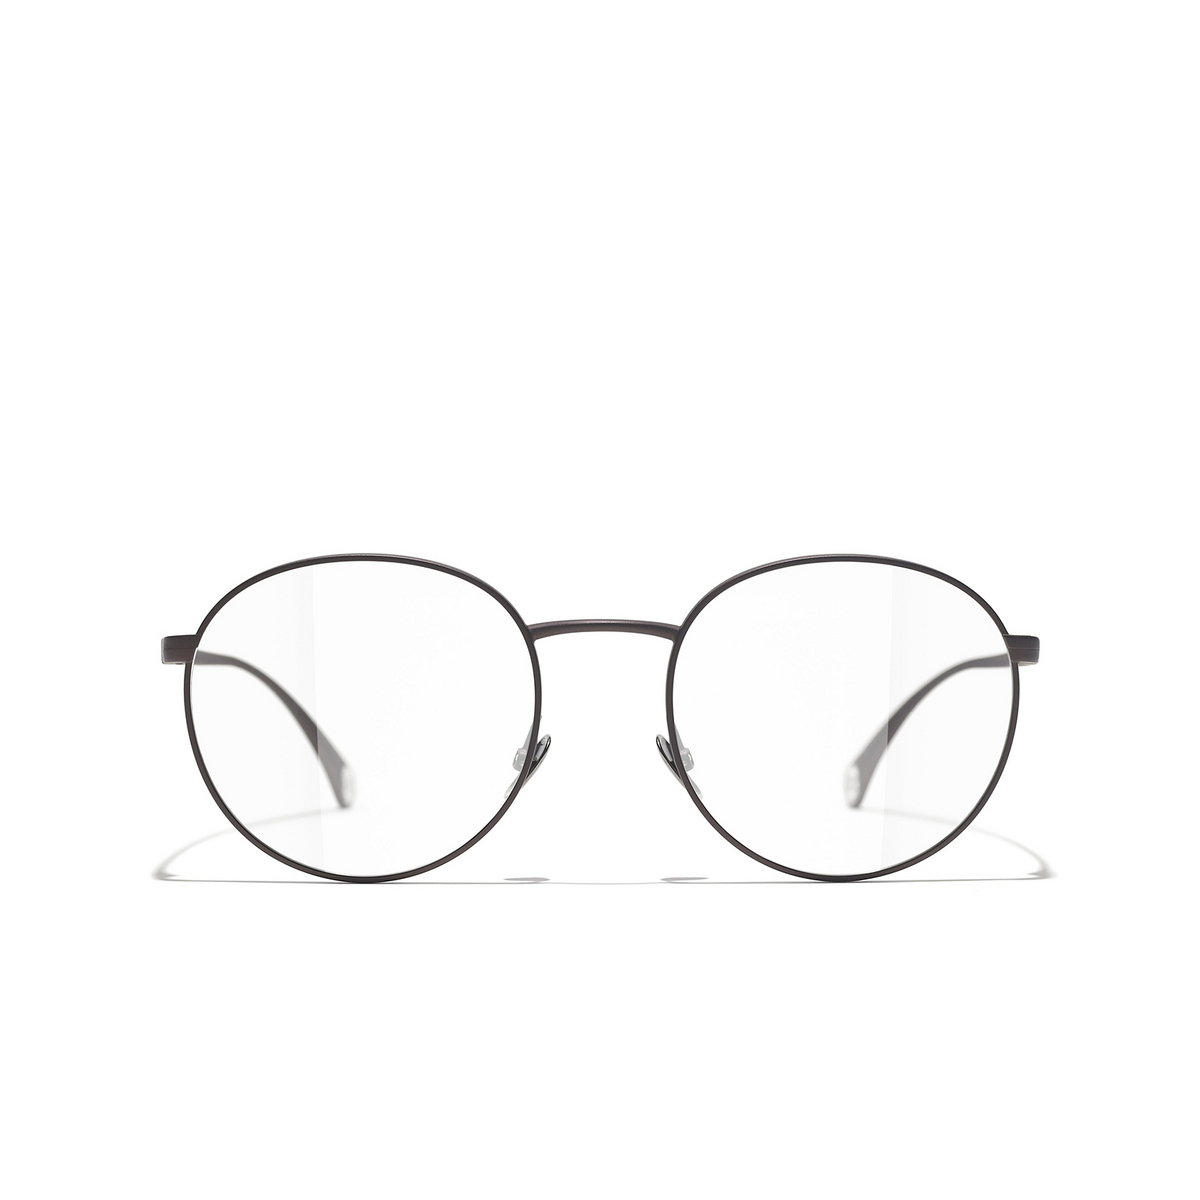 CHANEL oval Eyeglasses C479 Brown - front view